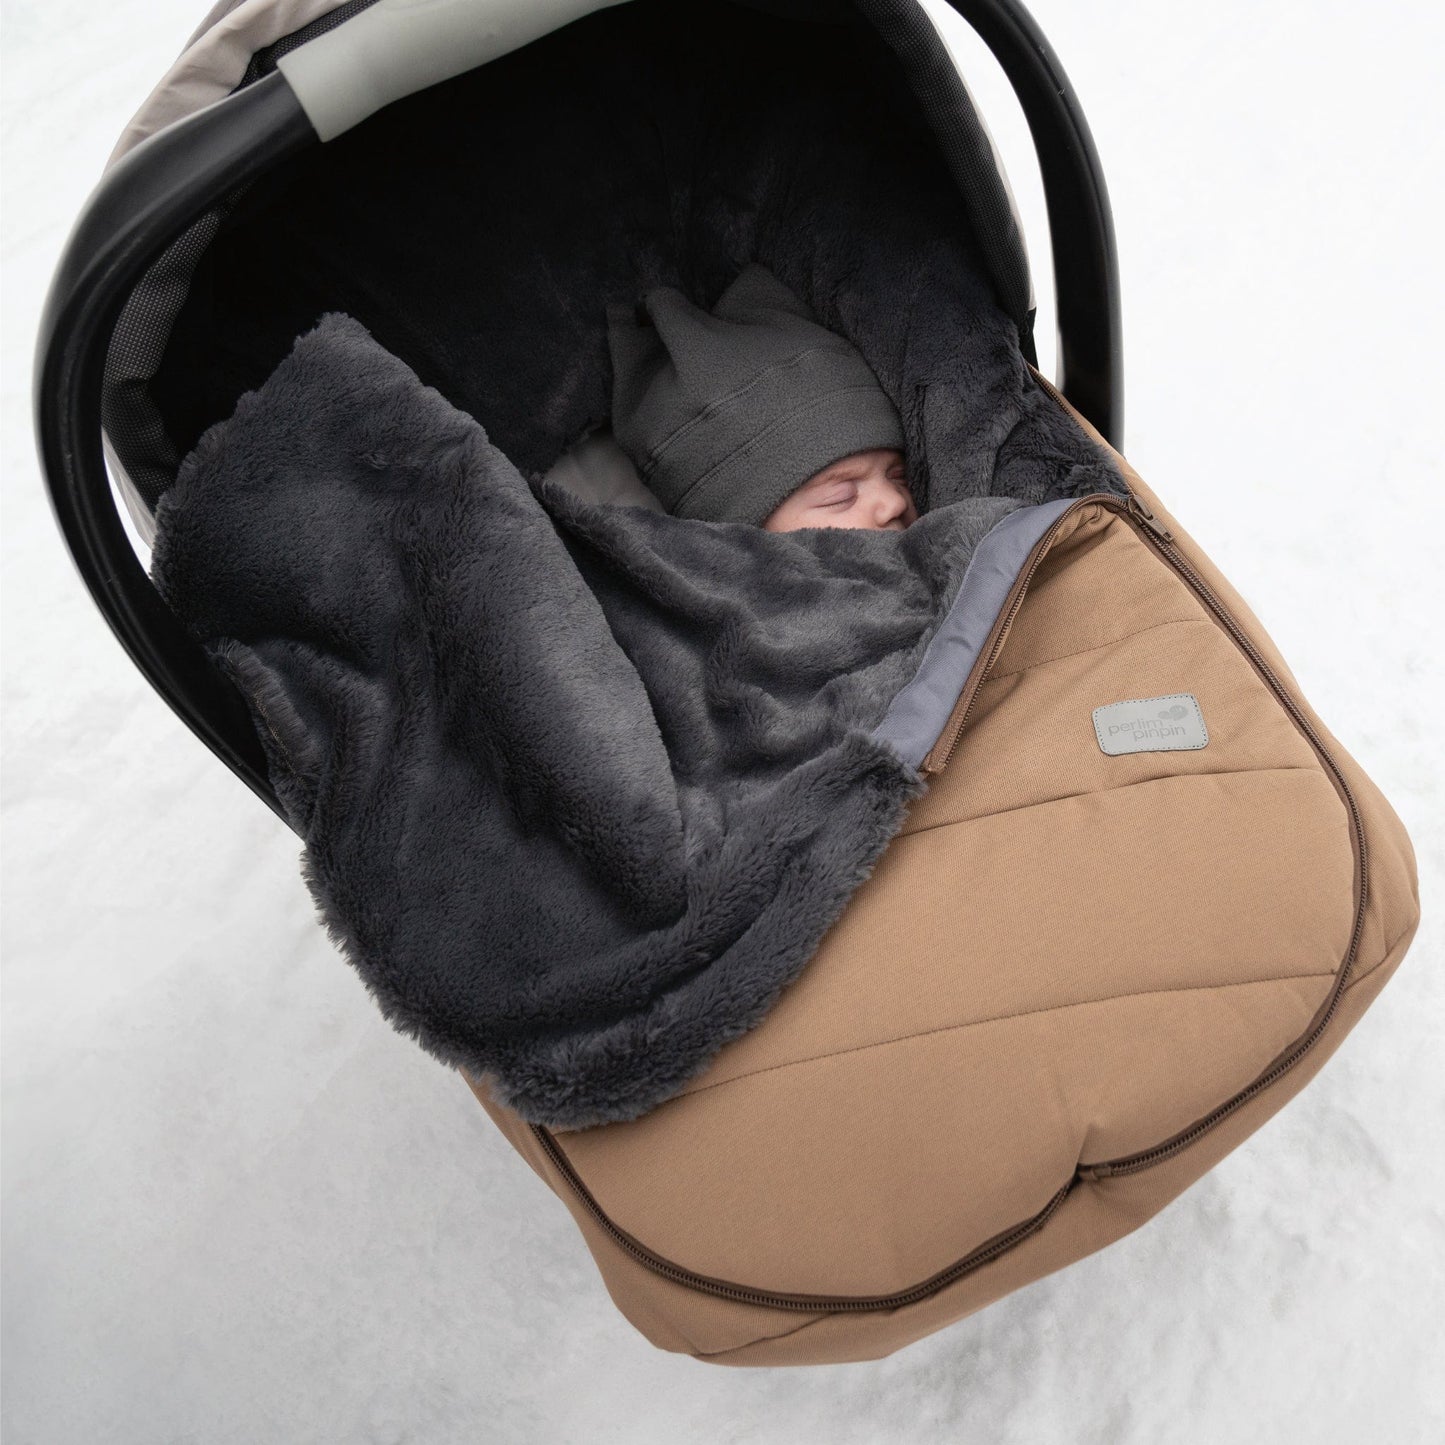 Baby car seat cover for winter - Sarcelle